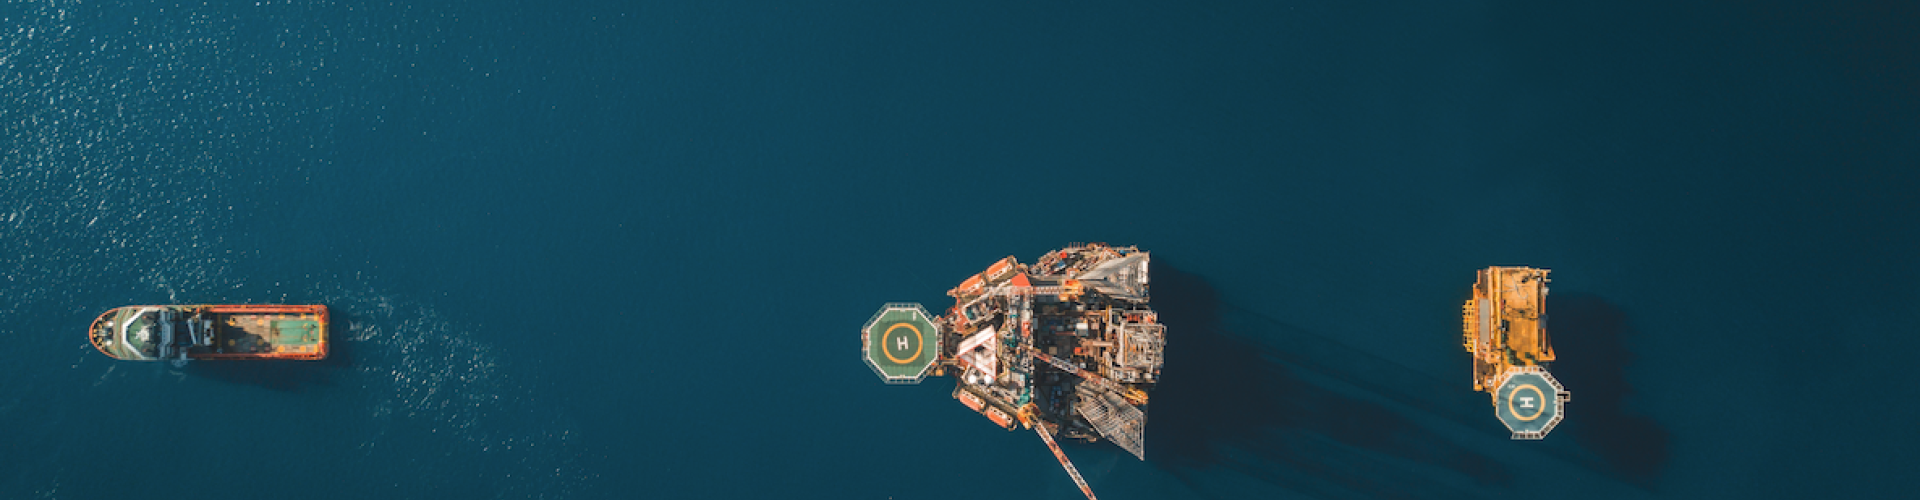 Aerial view of an oil rig